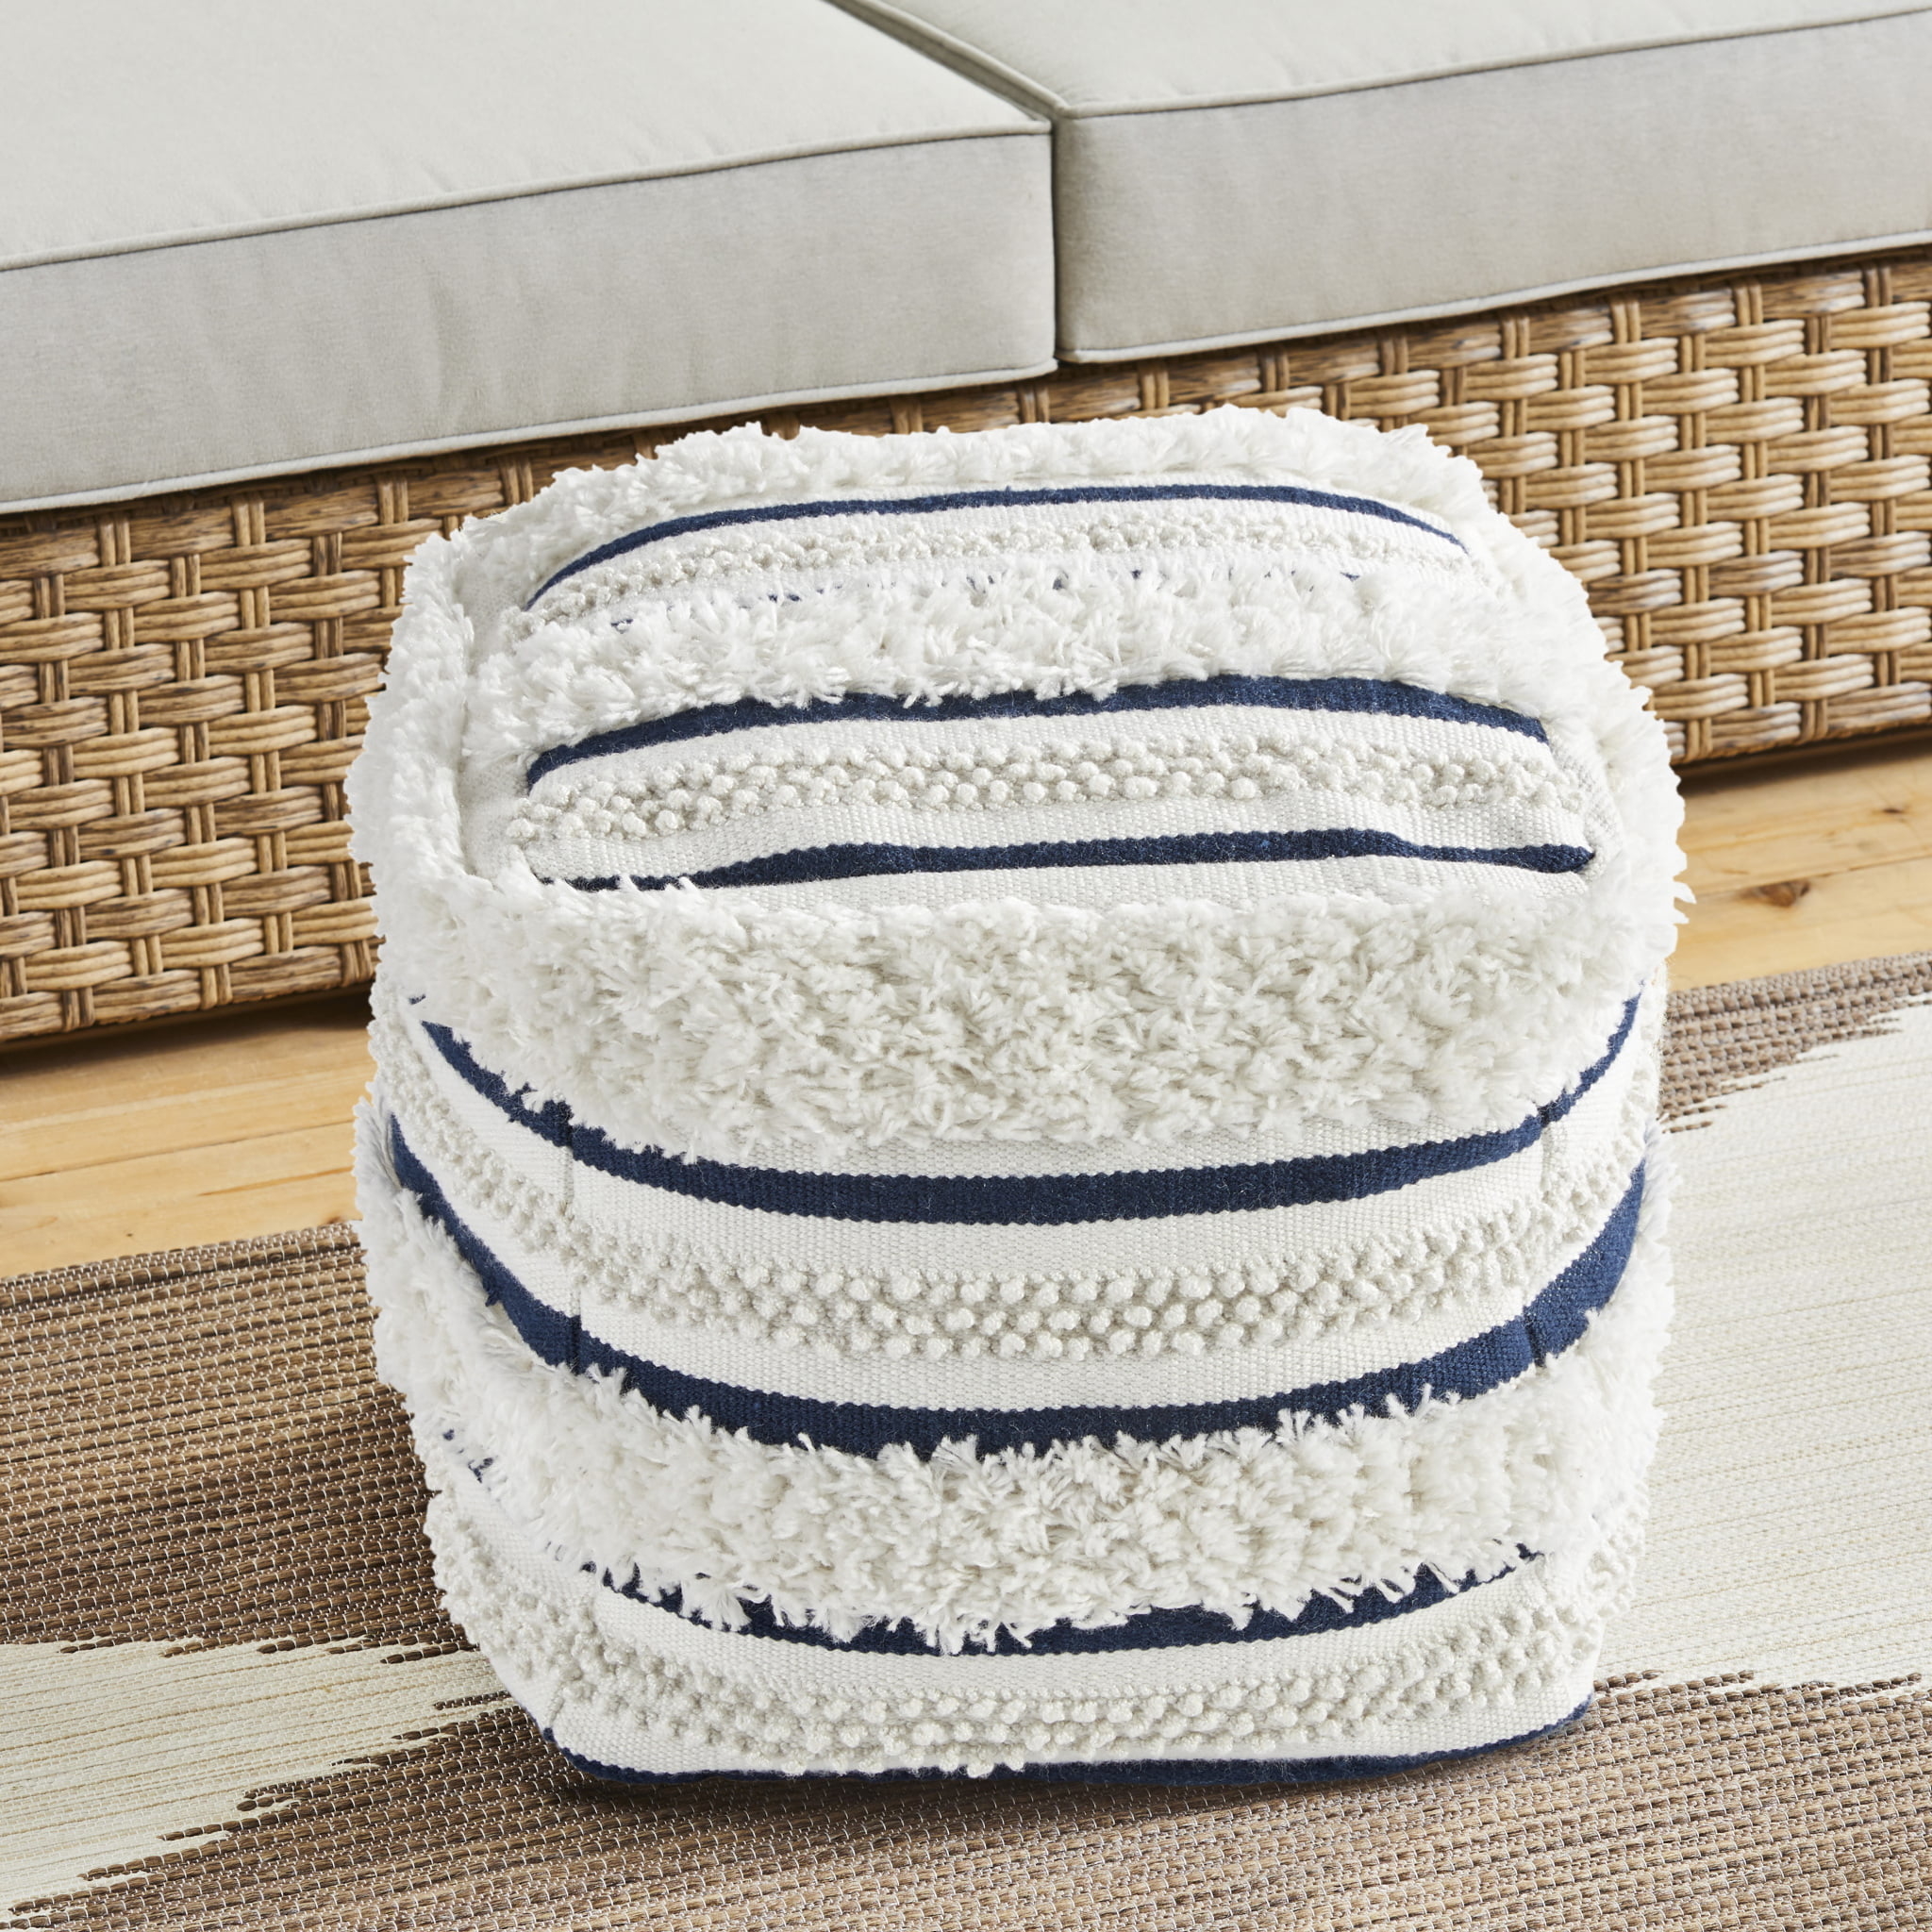 the navy and cream pouf